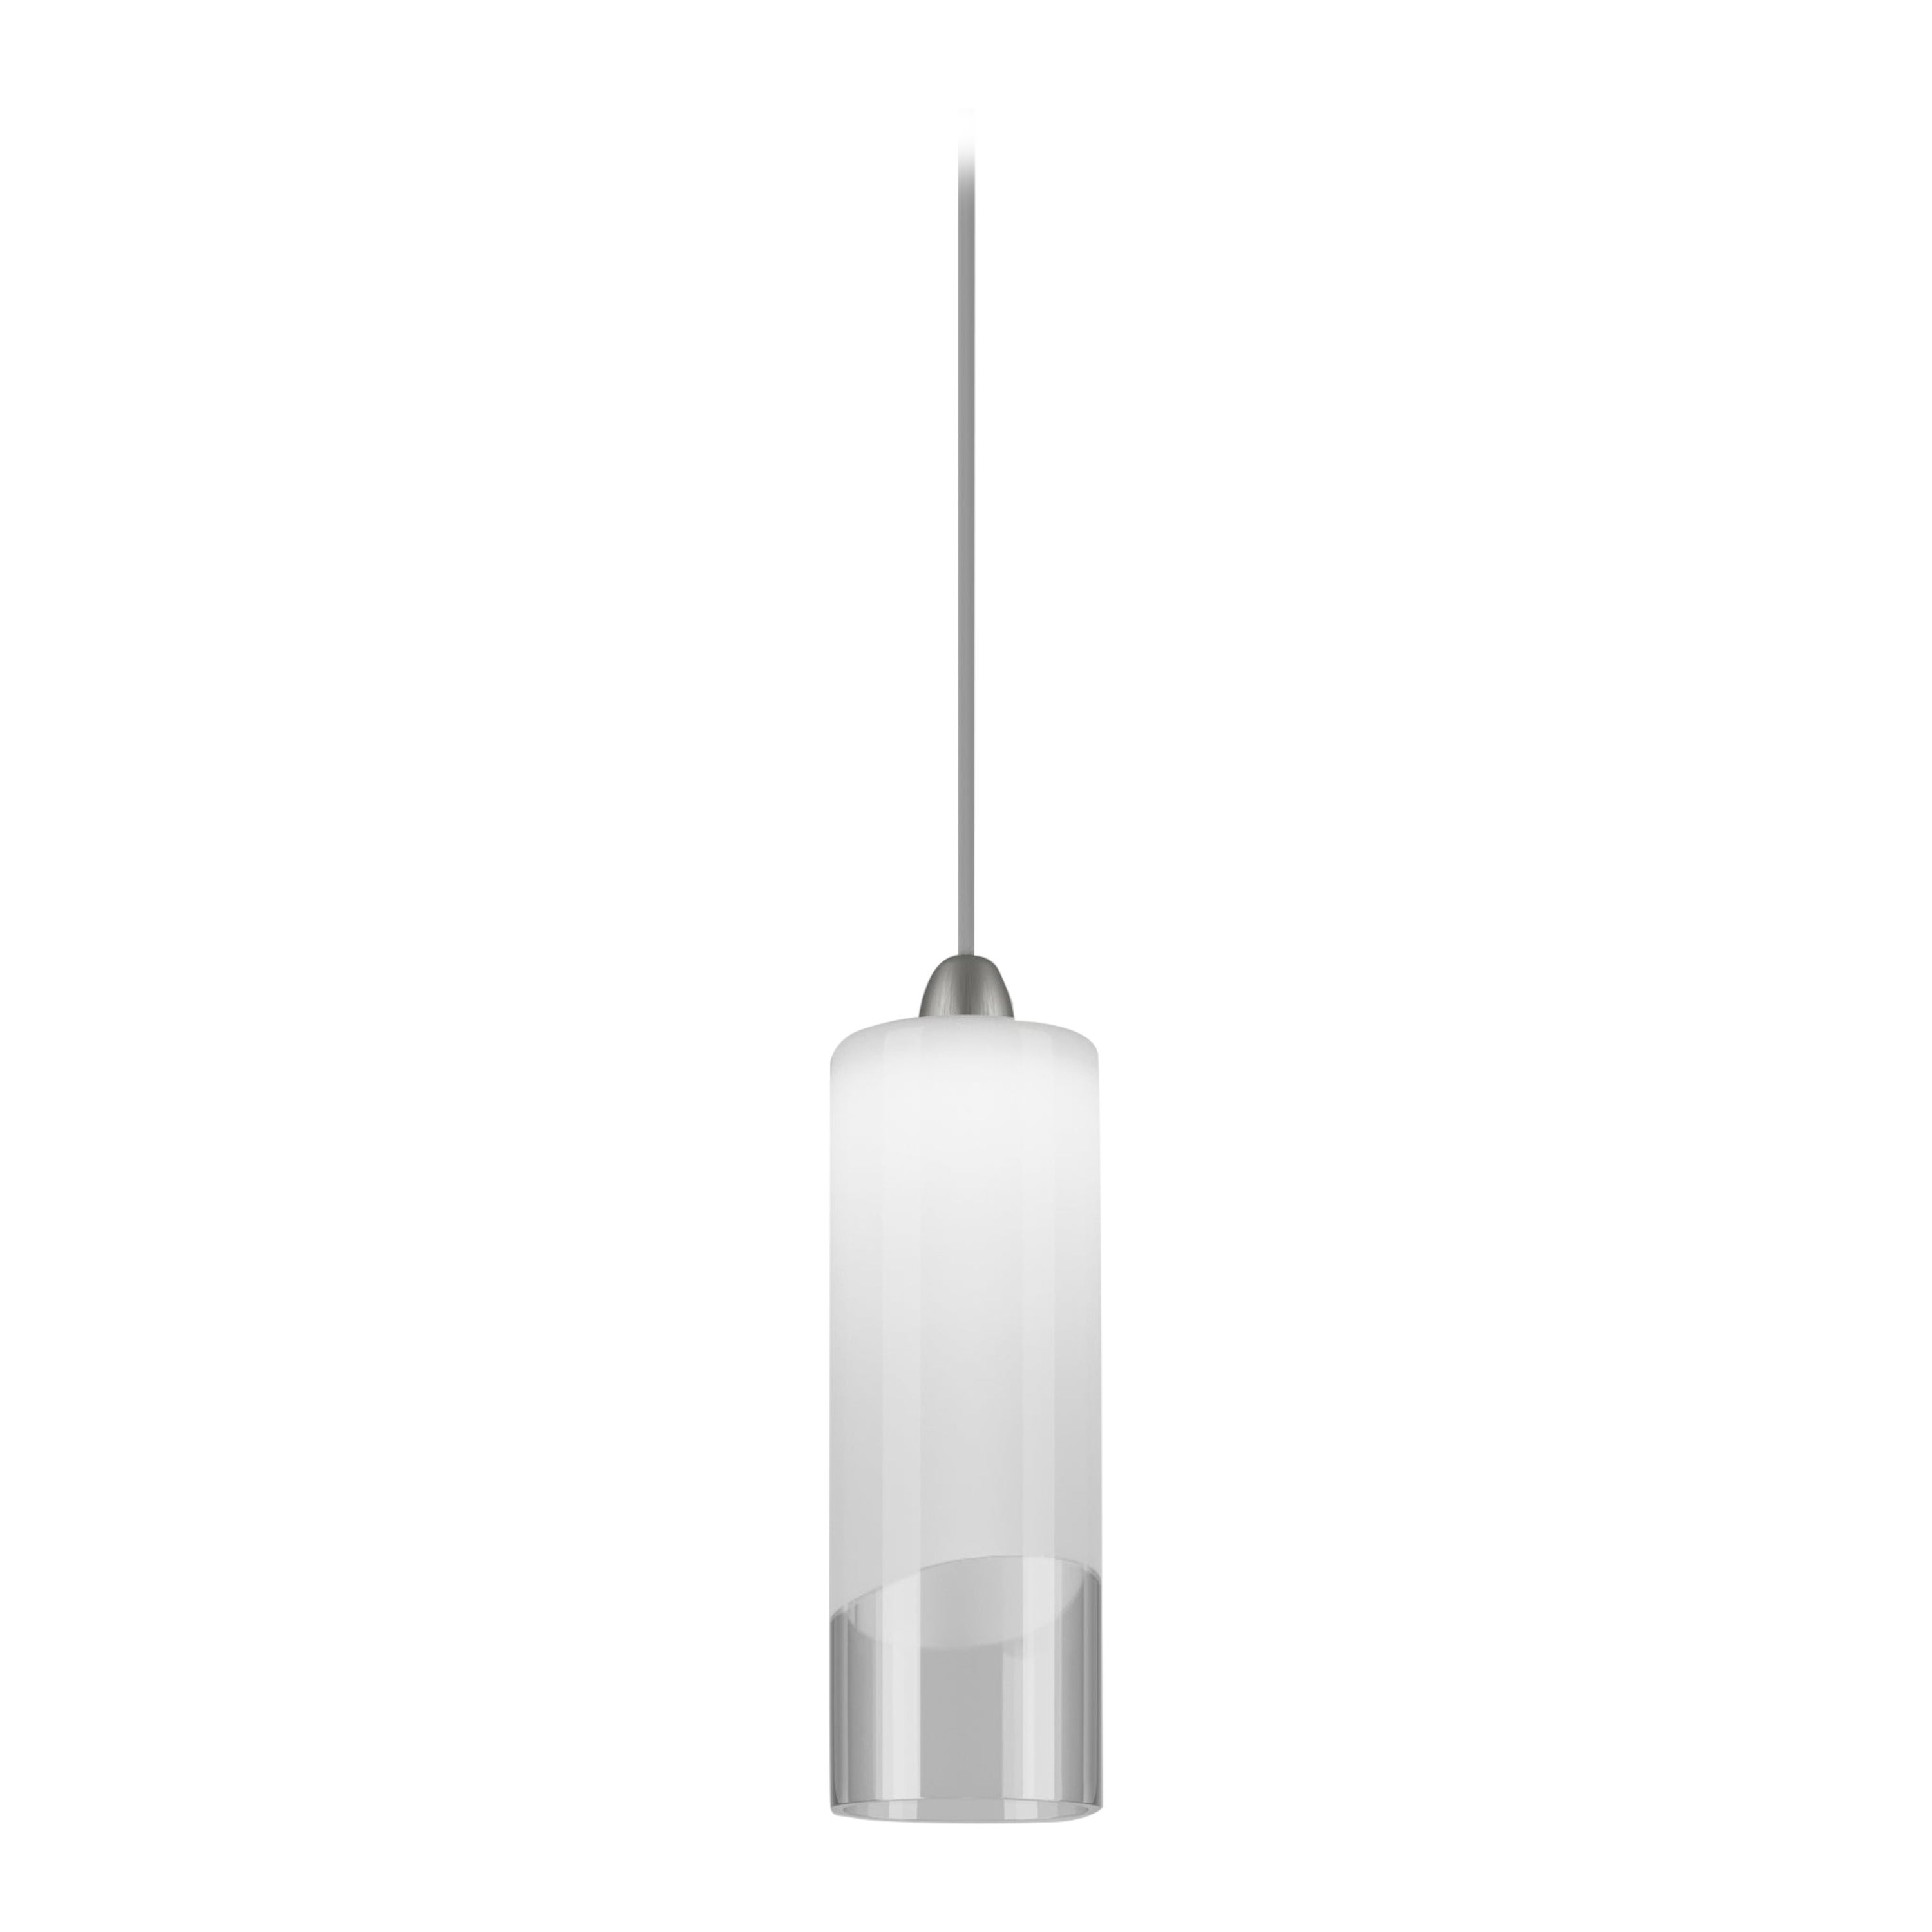 Vistosi Lio Pendant Light in Crystal White Glass And Satin Nickel Finish For Sale